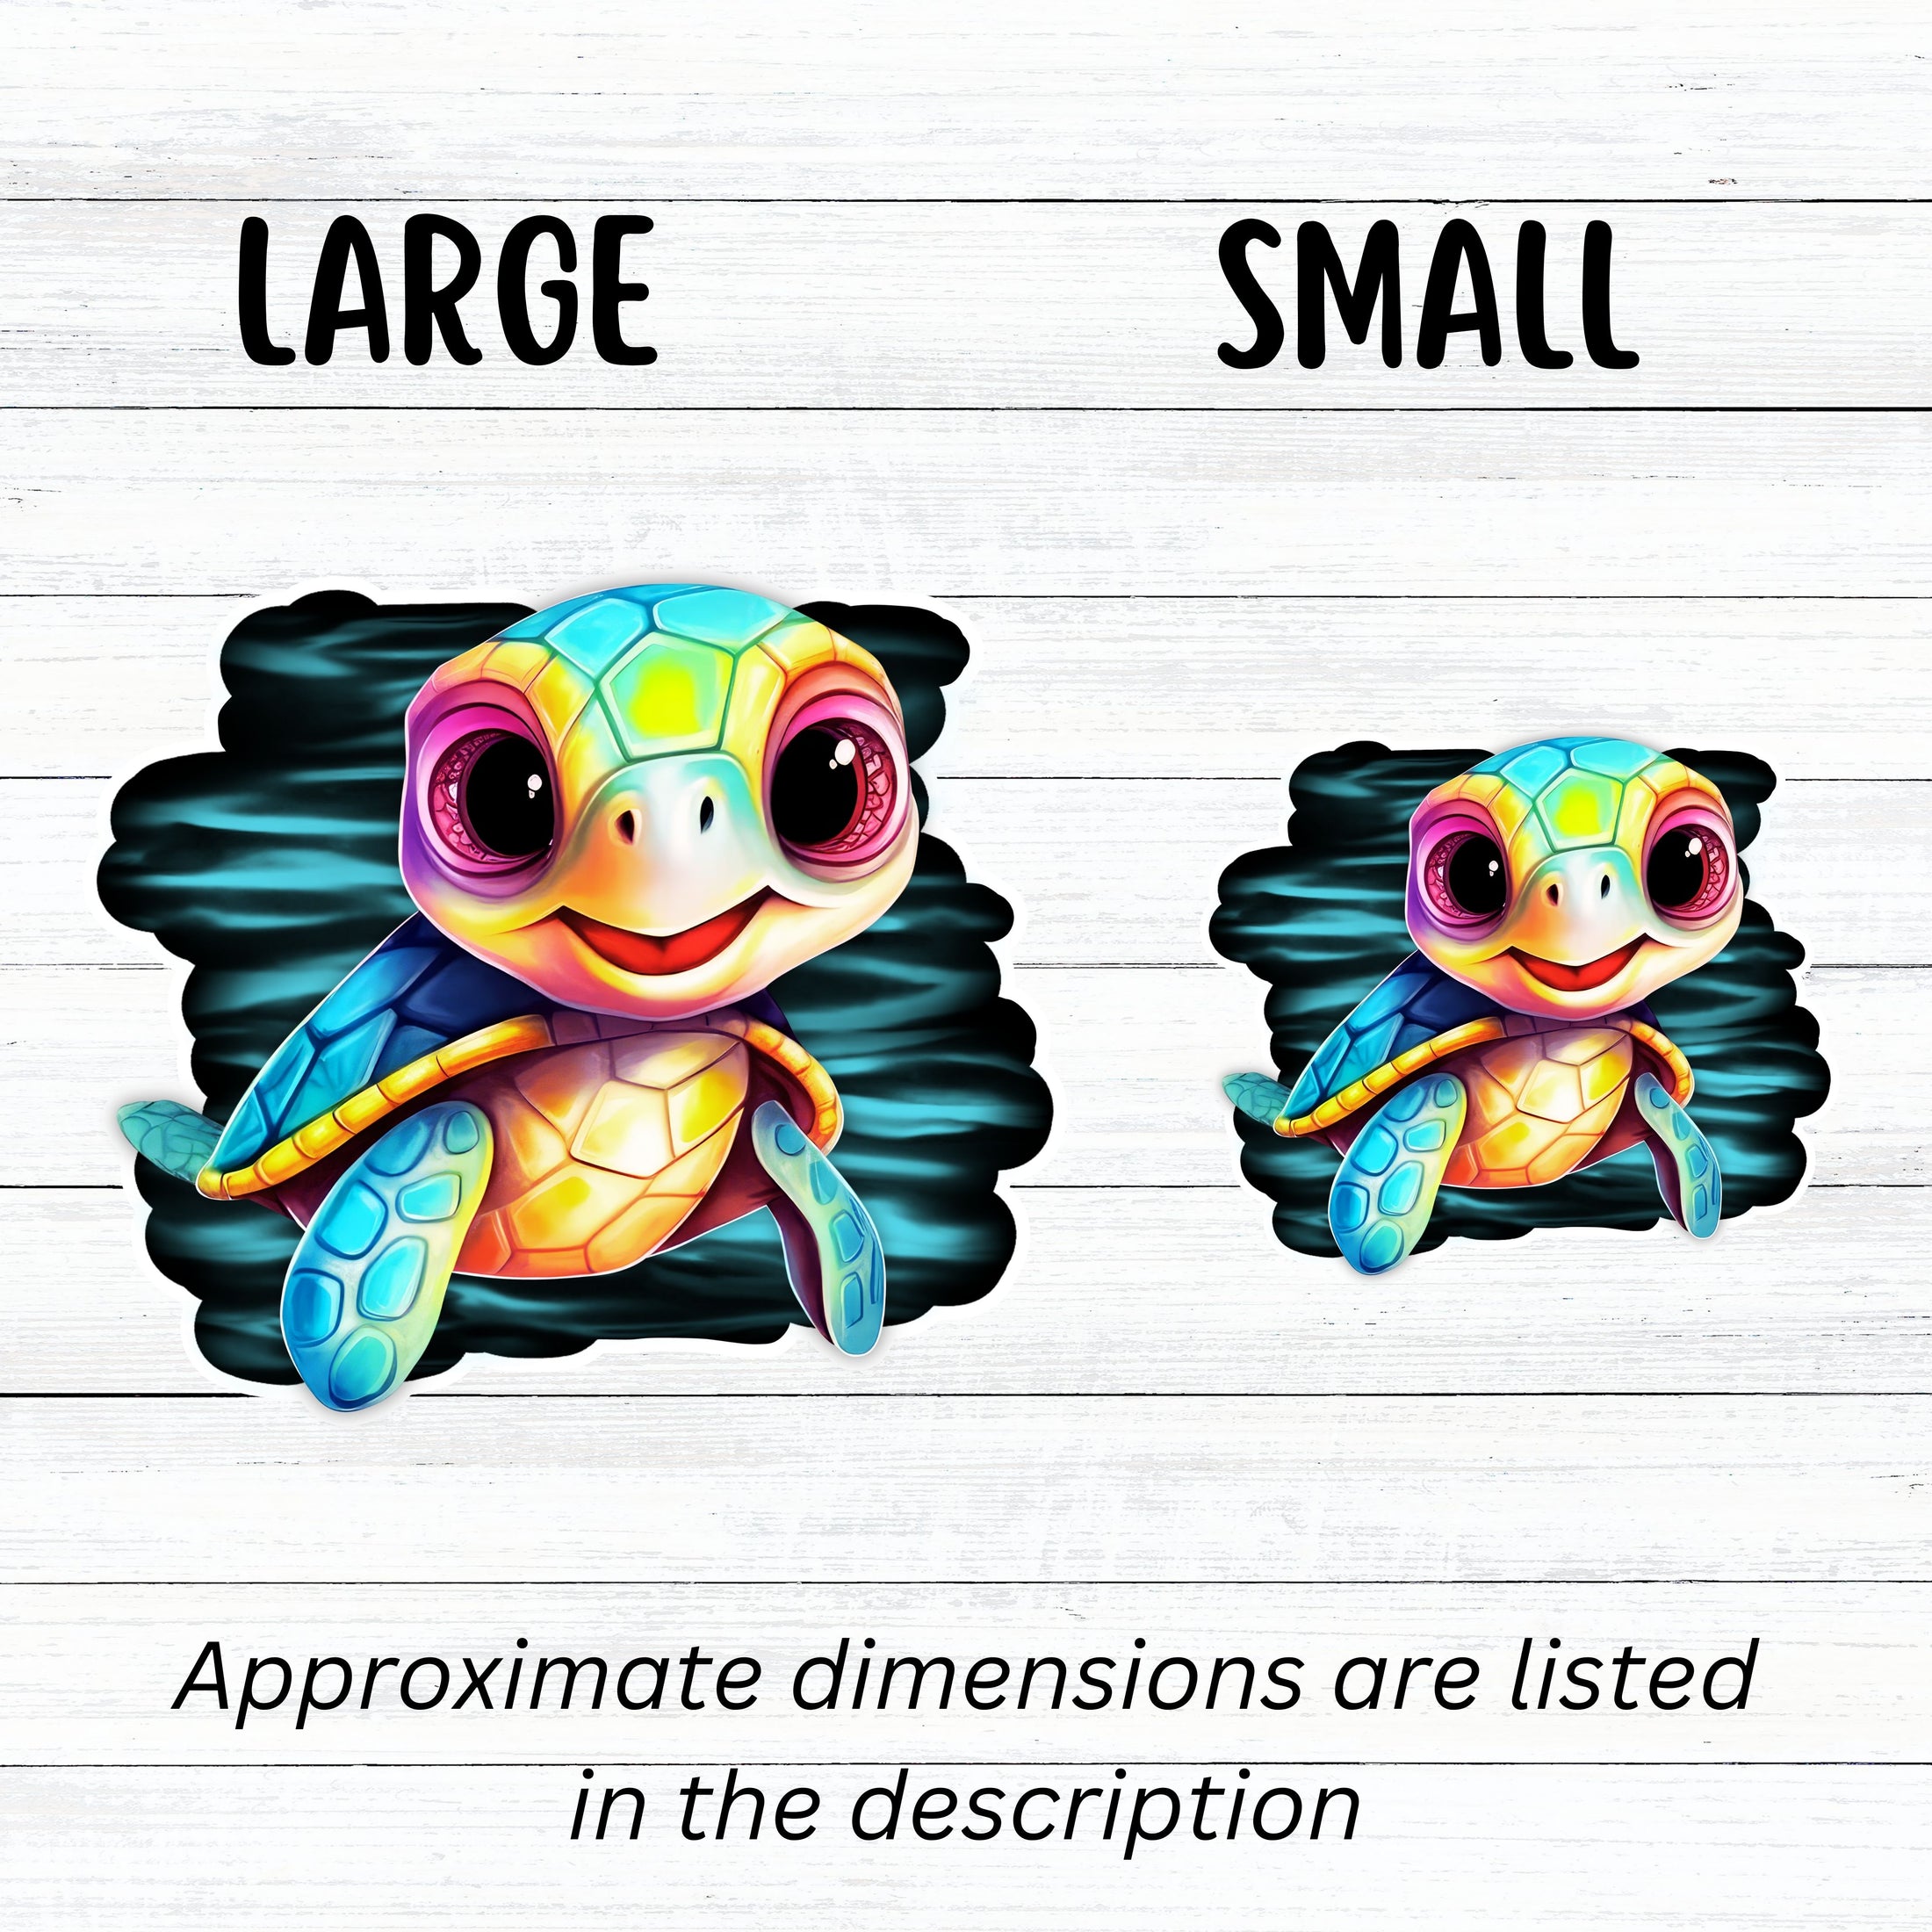 This image shows large and small baby sea turtle stickers next to each other.